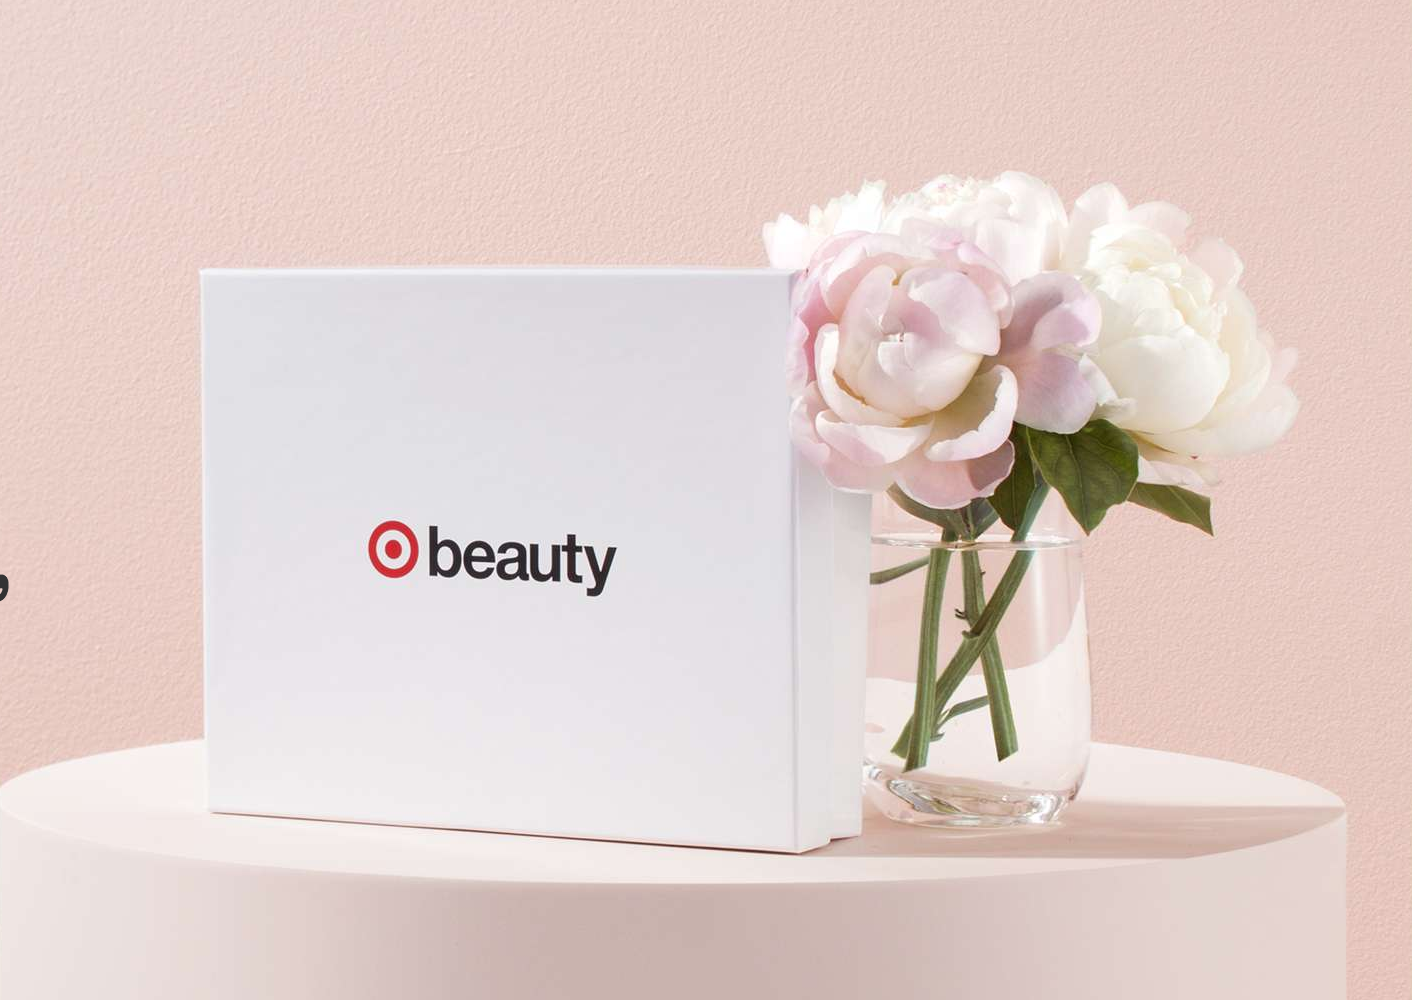 April 2020 Target Beauty Box #2 – Available Now!